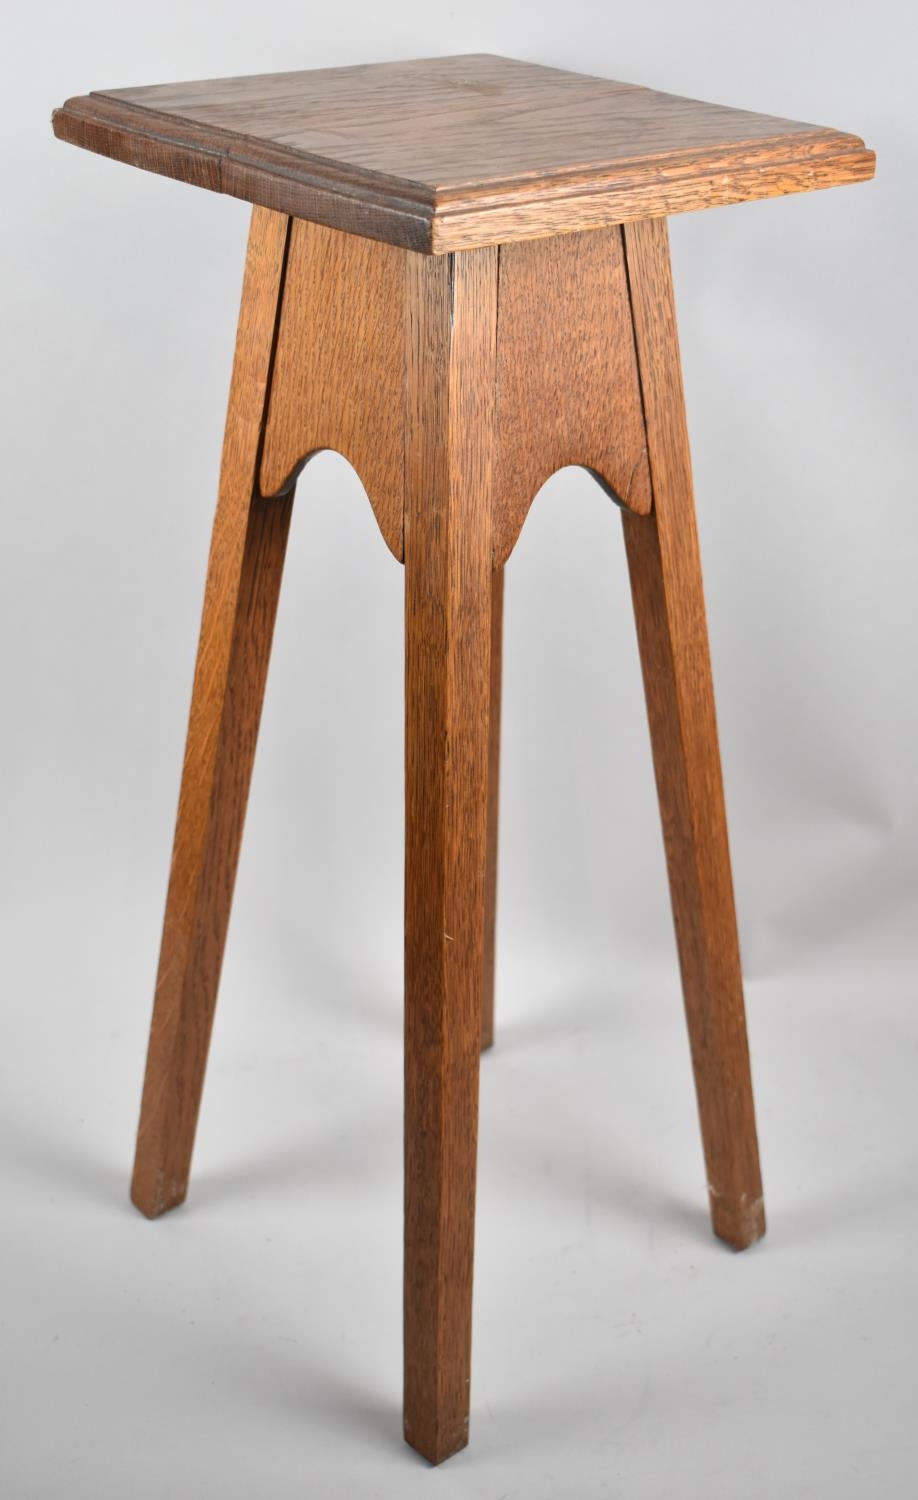 An Edwardian Oak Jardiniere Stand with 25cm Square Top, 61cm high